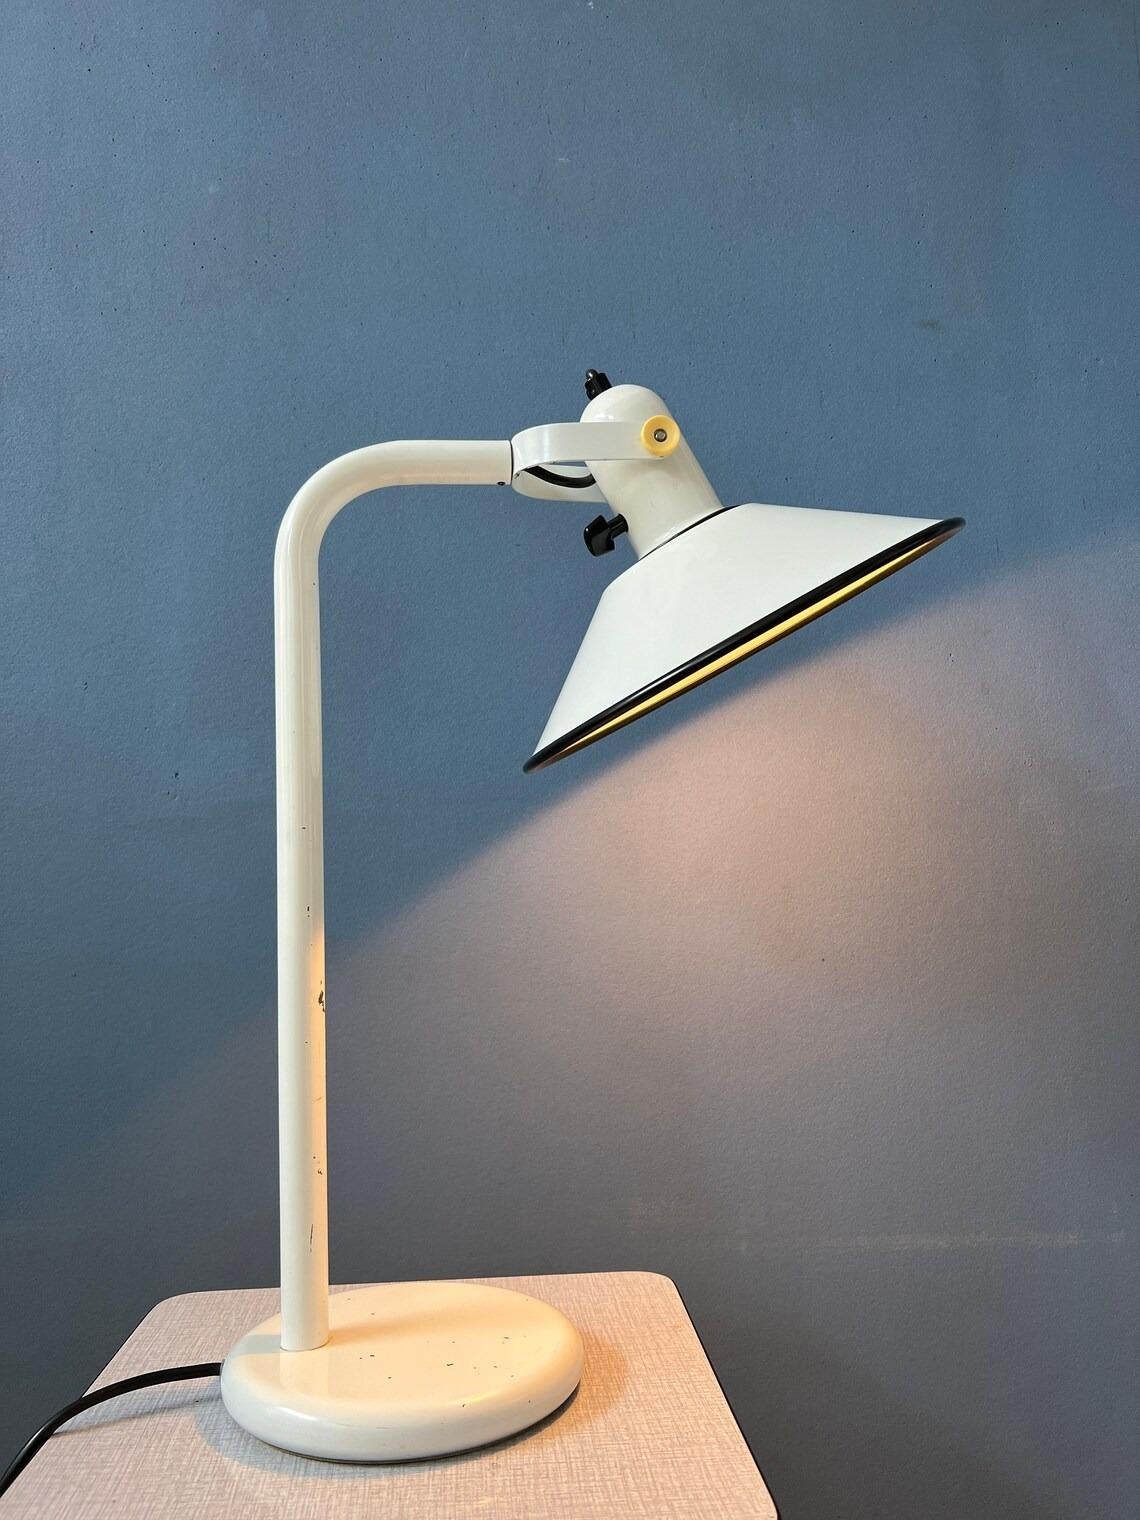 Very rare mid century desk lamp by Anvia. The has a white, metal frame with a black finish on the edge. The shade can be easily adjusted in position, see pictures. The lamp has a black switch on top of the shade. The lamp requires one E27 (standard)